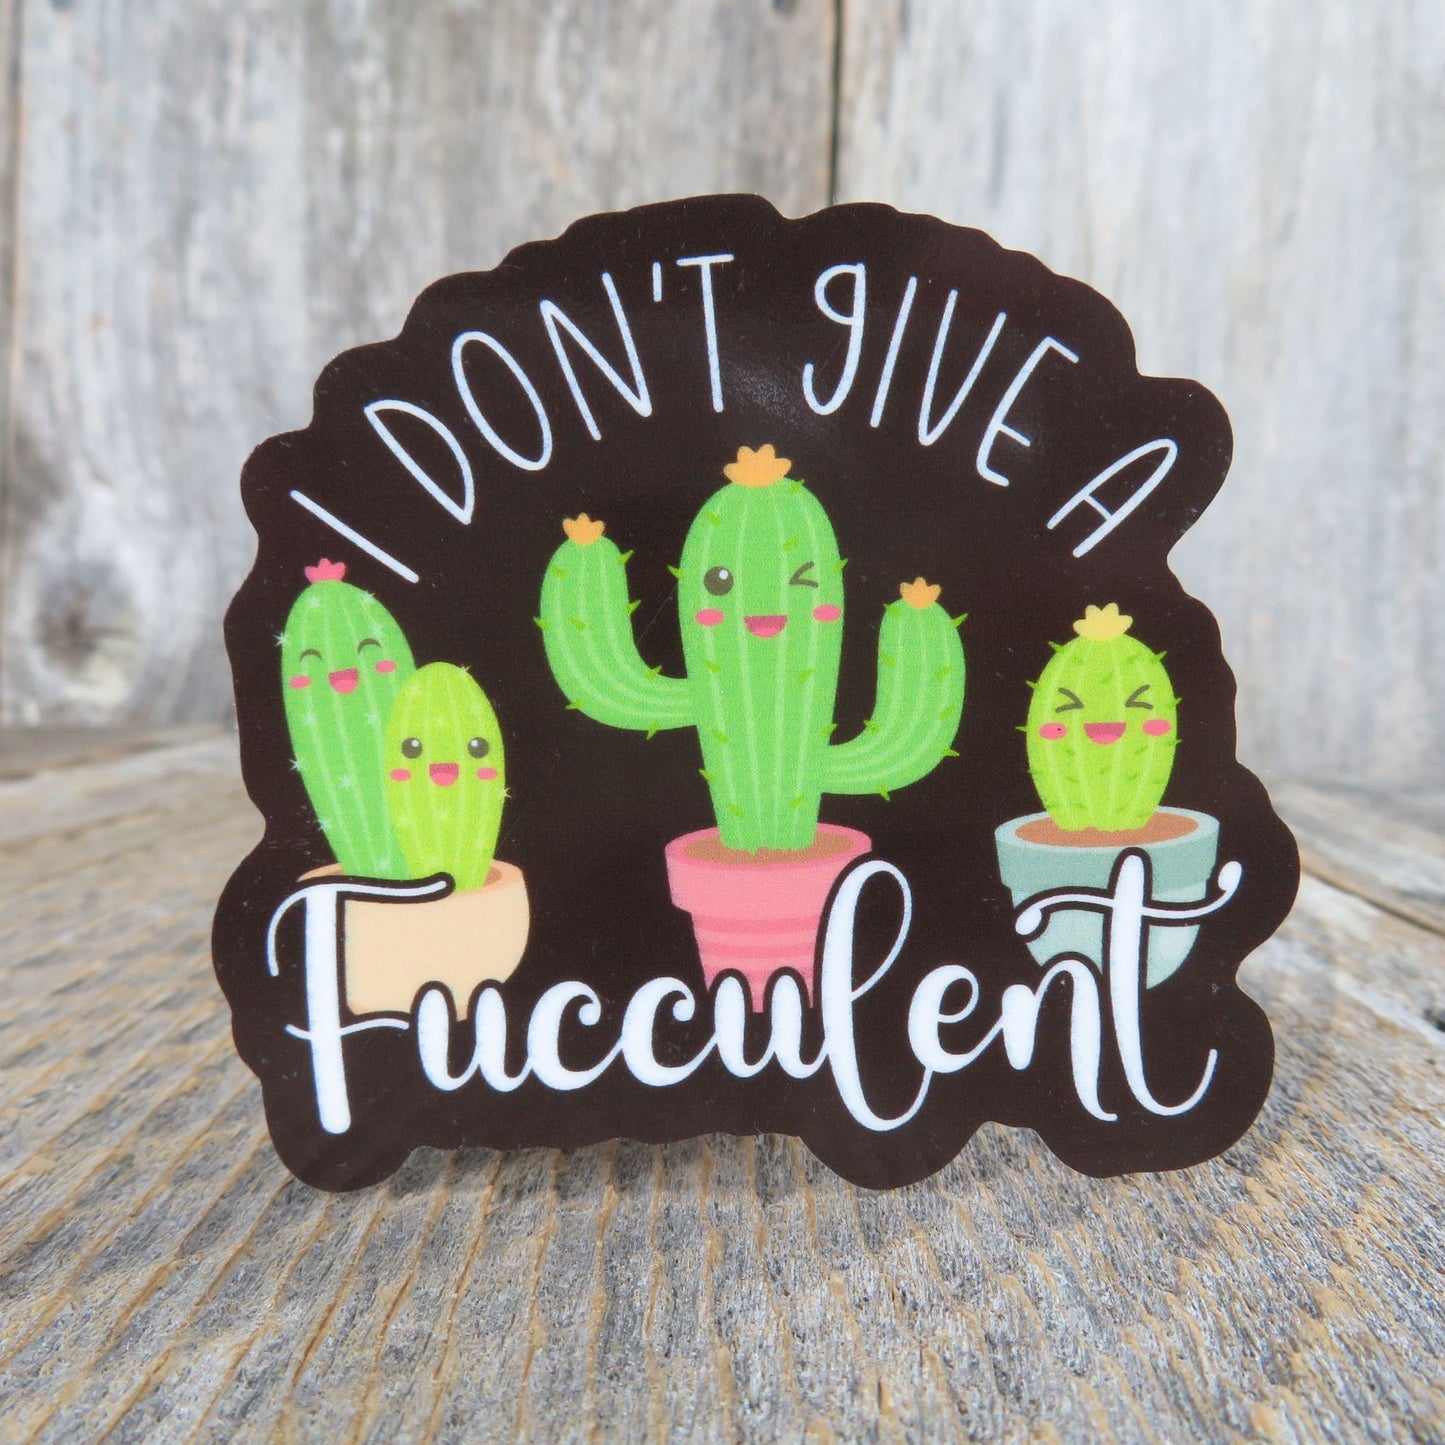 Funny Succulent Sticker I Don't Give a Fucculent Plant Addict Swear Word Cactus